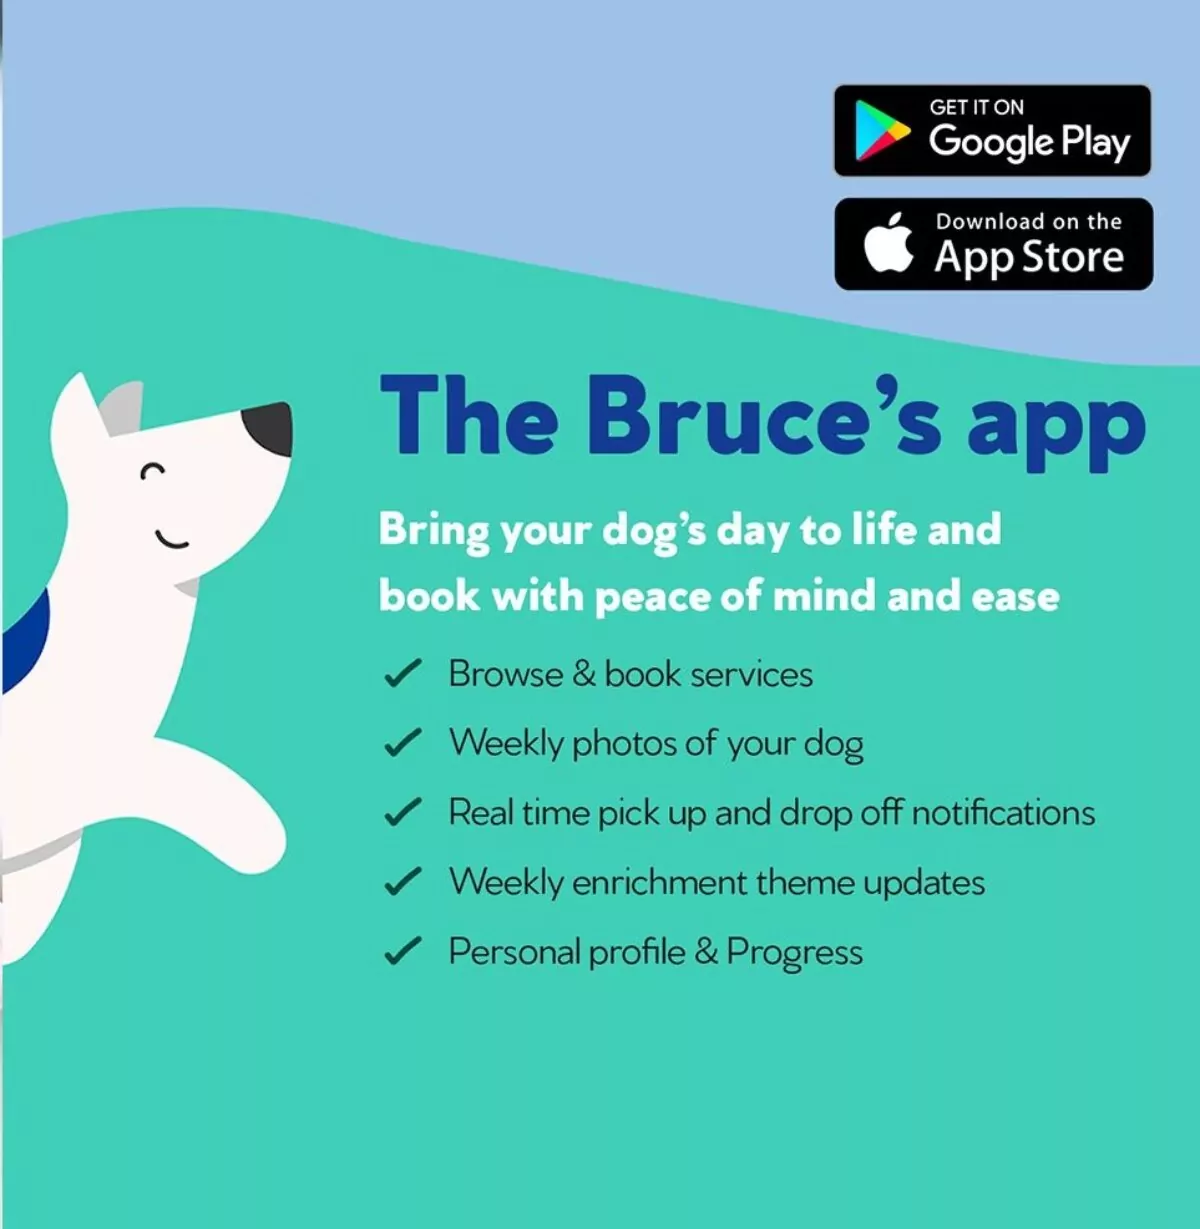 The bruces's doggy day care app benefits